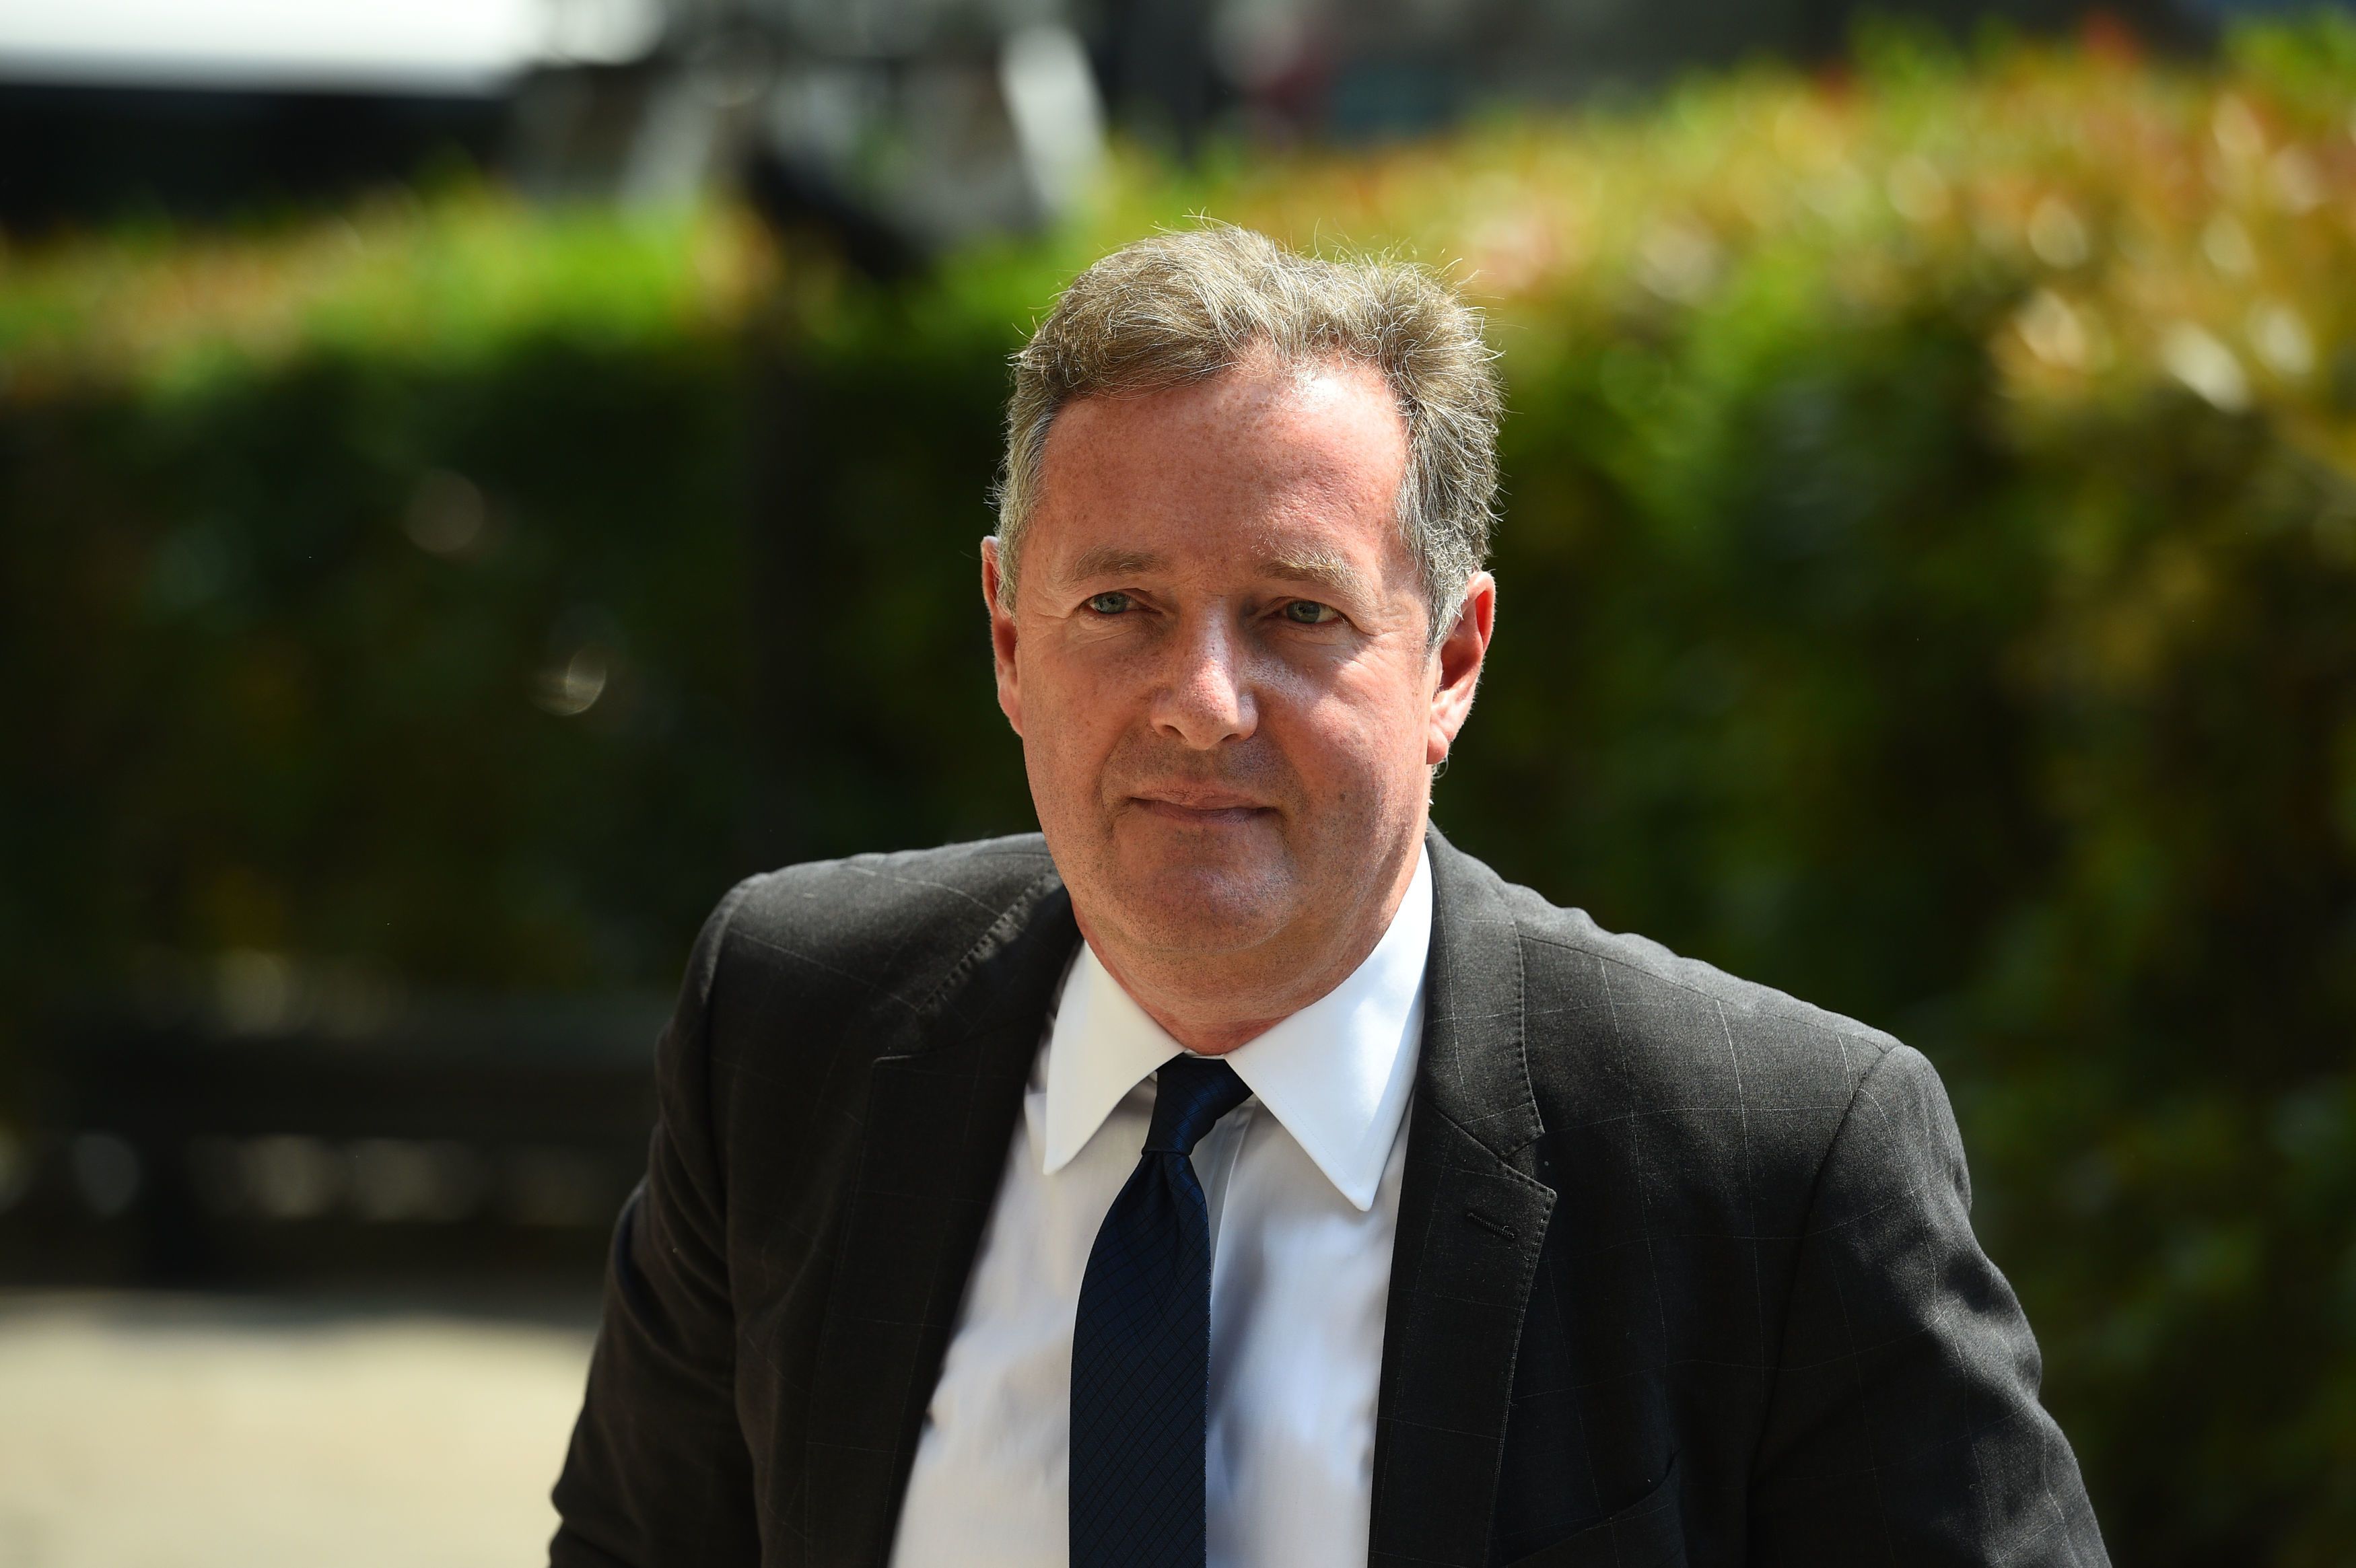 Piers Morgan at Old Church, 1 Marylebone Road in London for the funeral of Supermarket Sweep star Dale Winton on May 22, 2018 | Photo: Getty Images